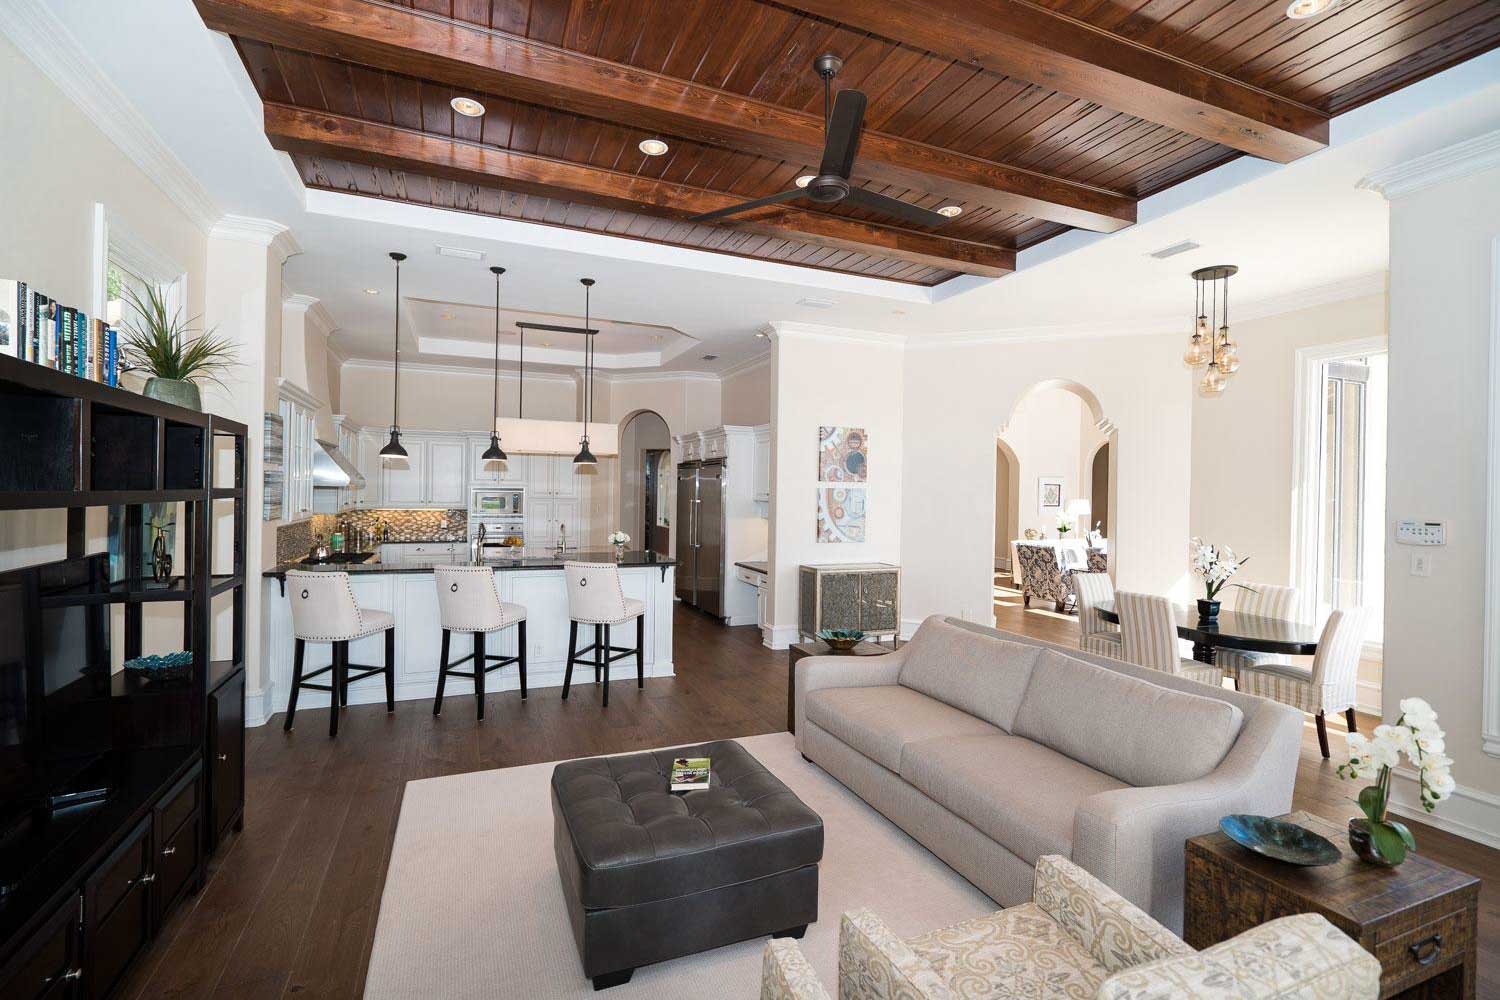 16770 Prato Way - Interior of Mansion Family Room with Views to Kitchen